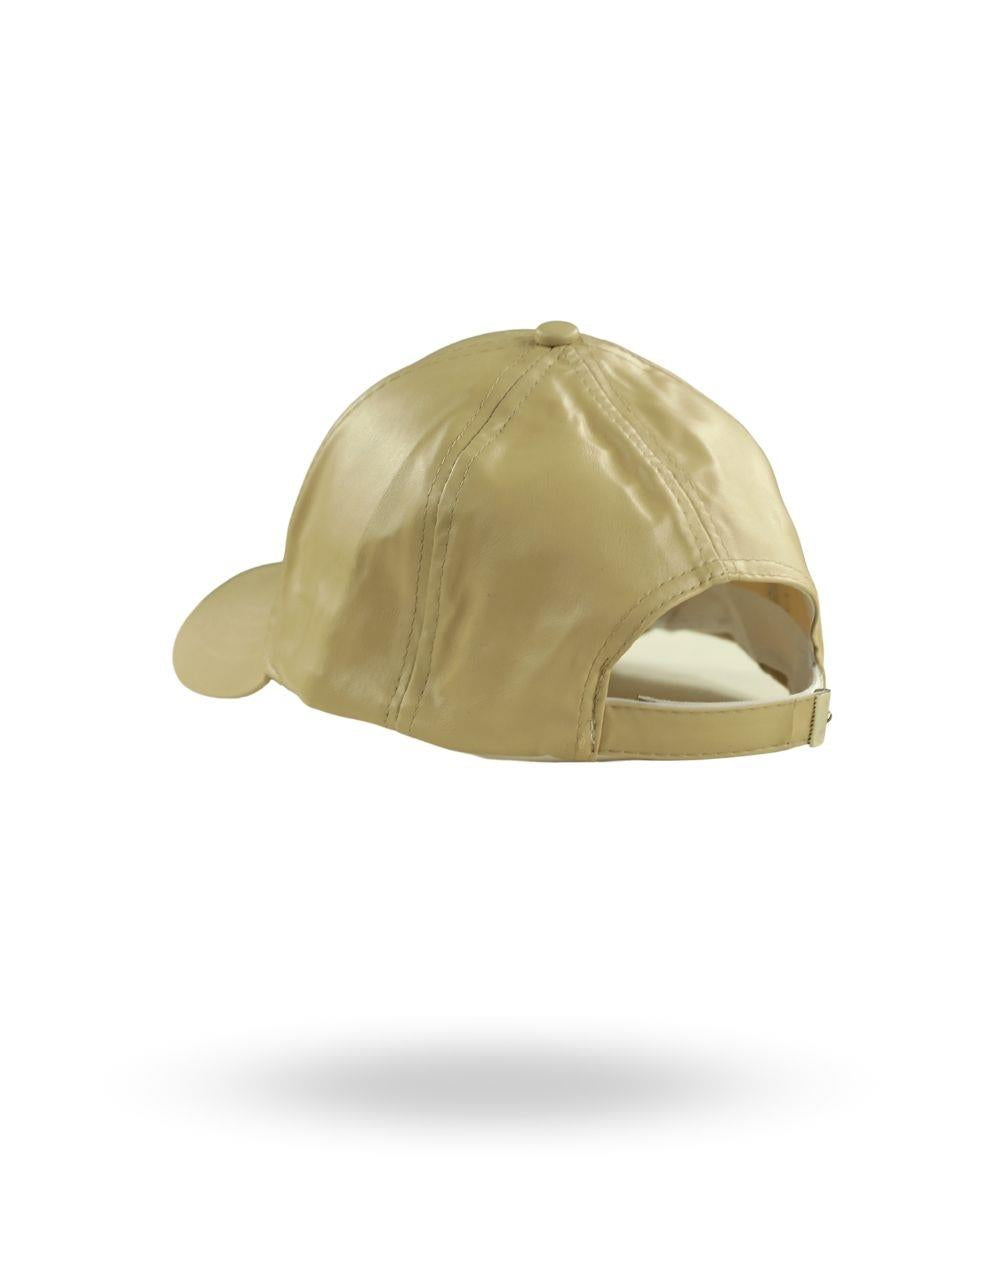 Basic Street Style Hat Mad Beige - STREETMODE™